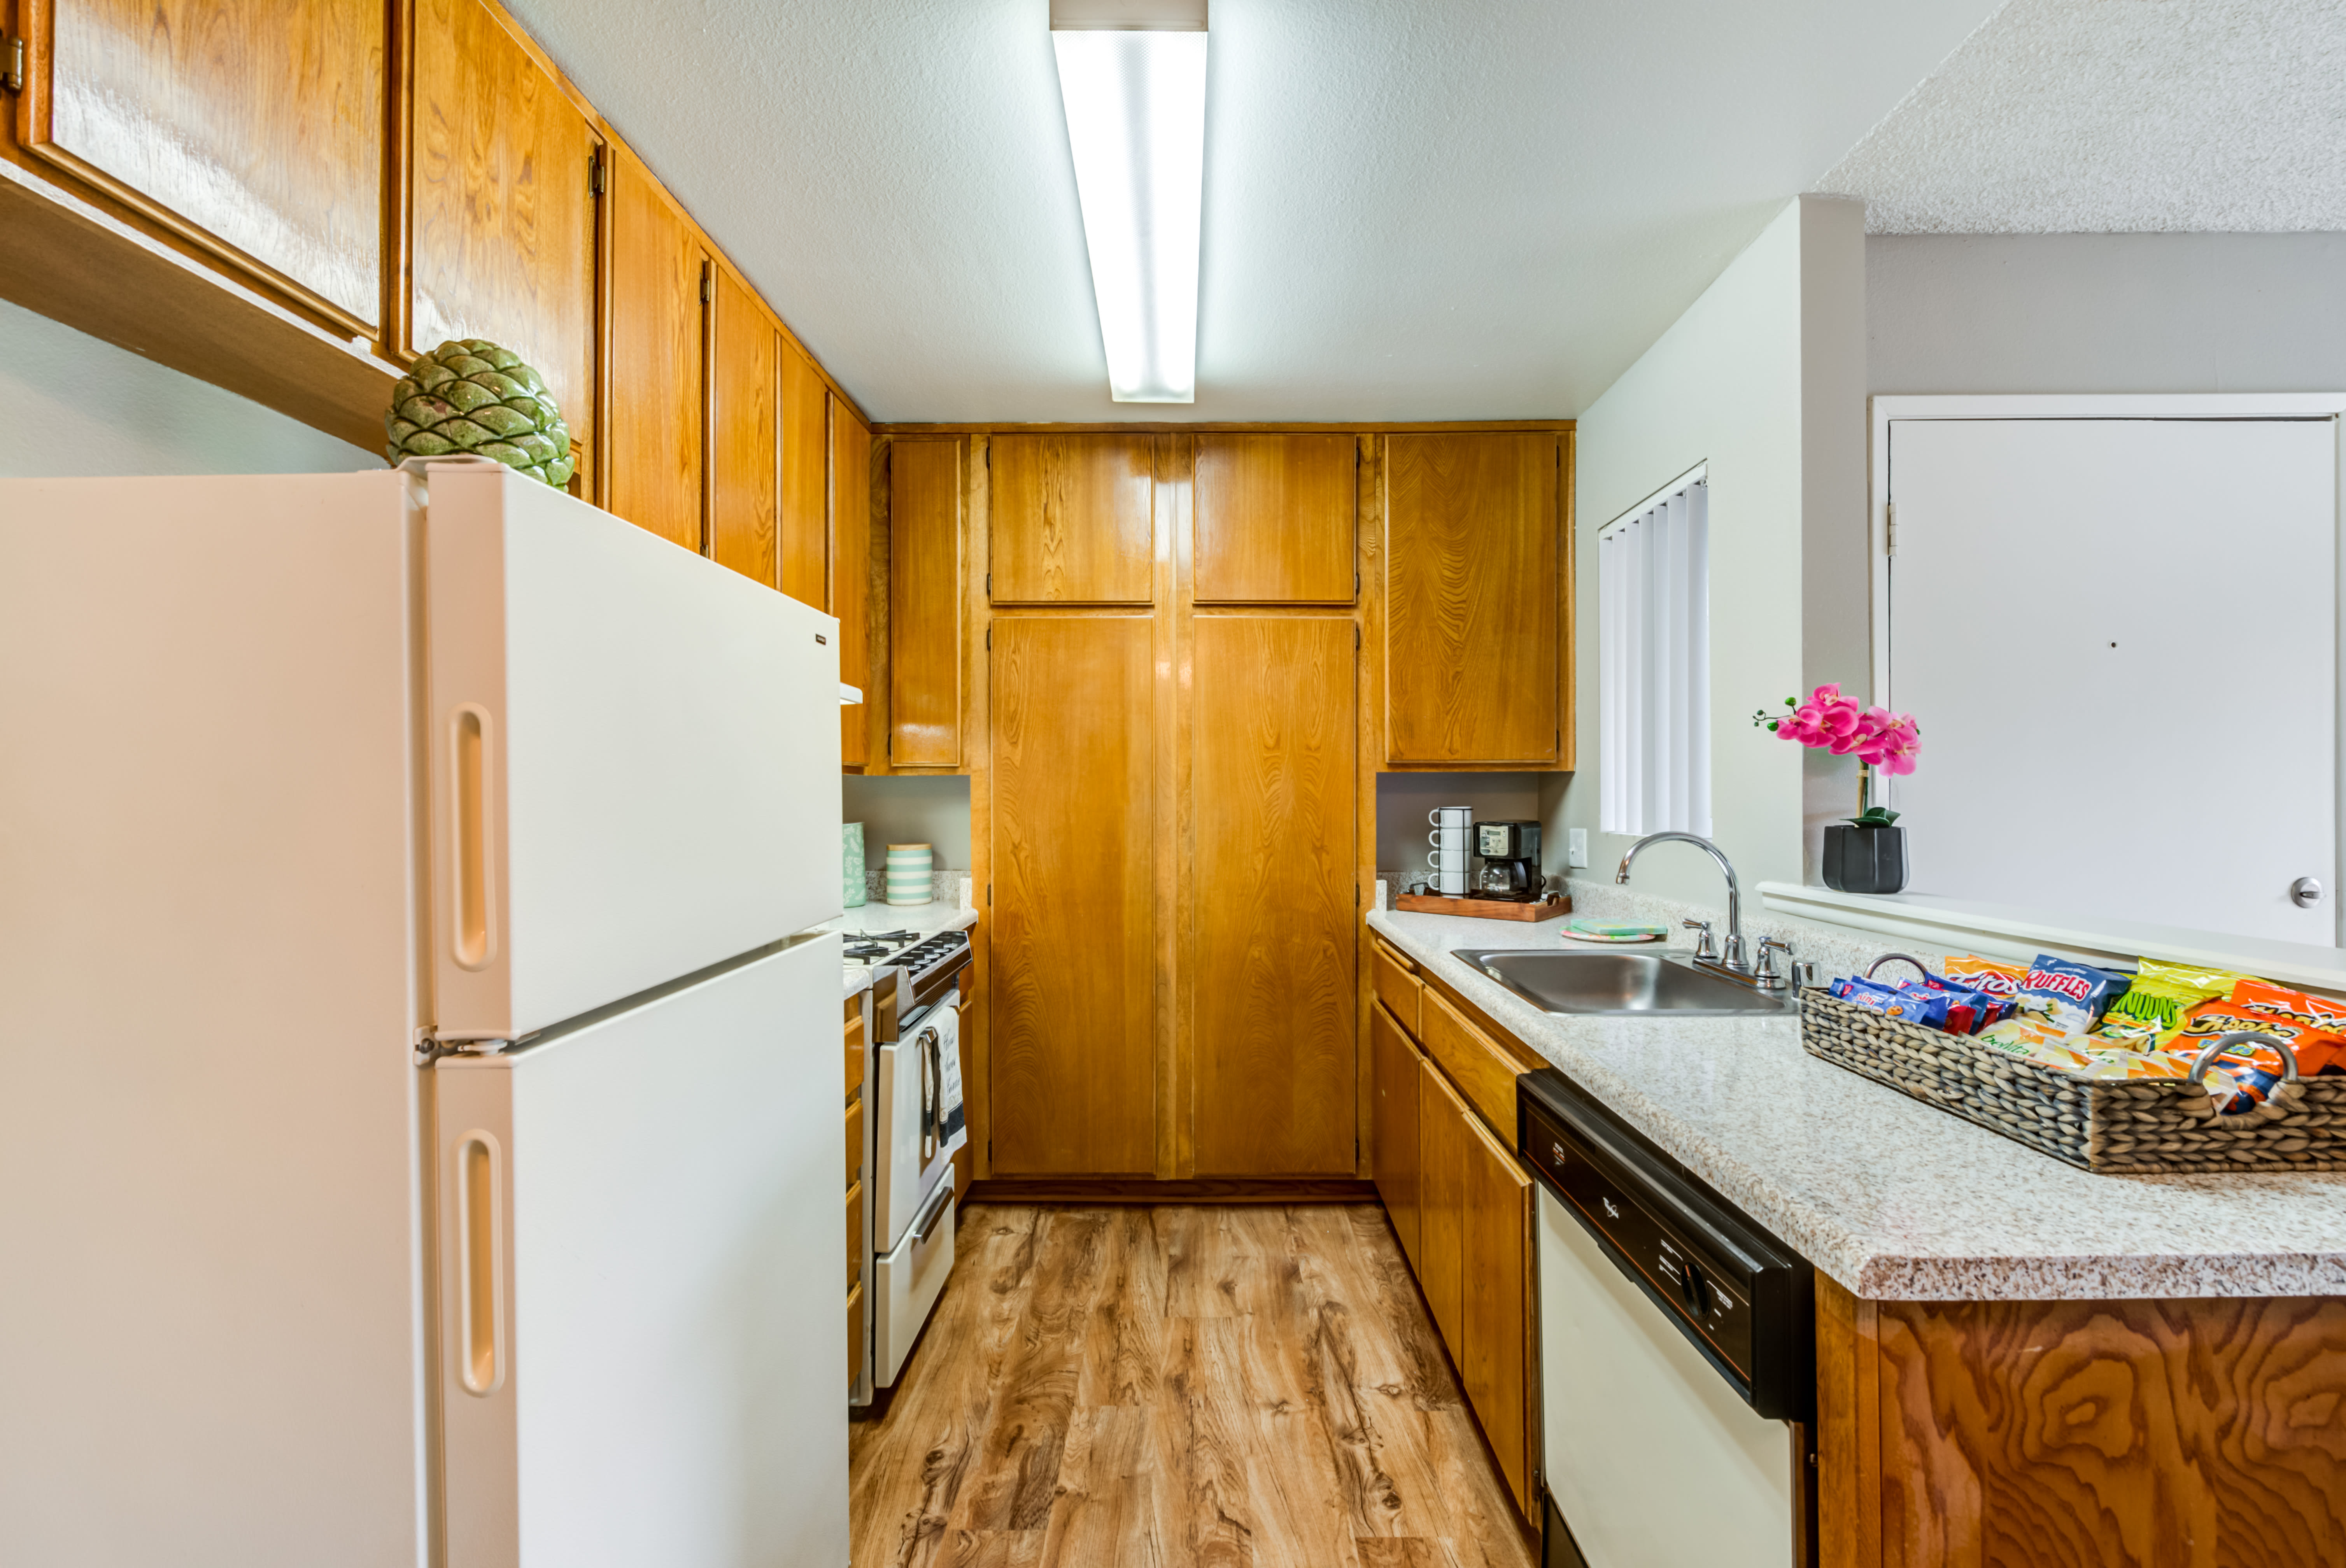 Kitchen at Apartments in Rowland Heights, California